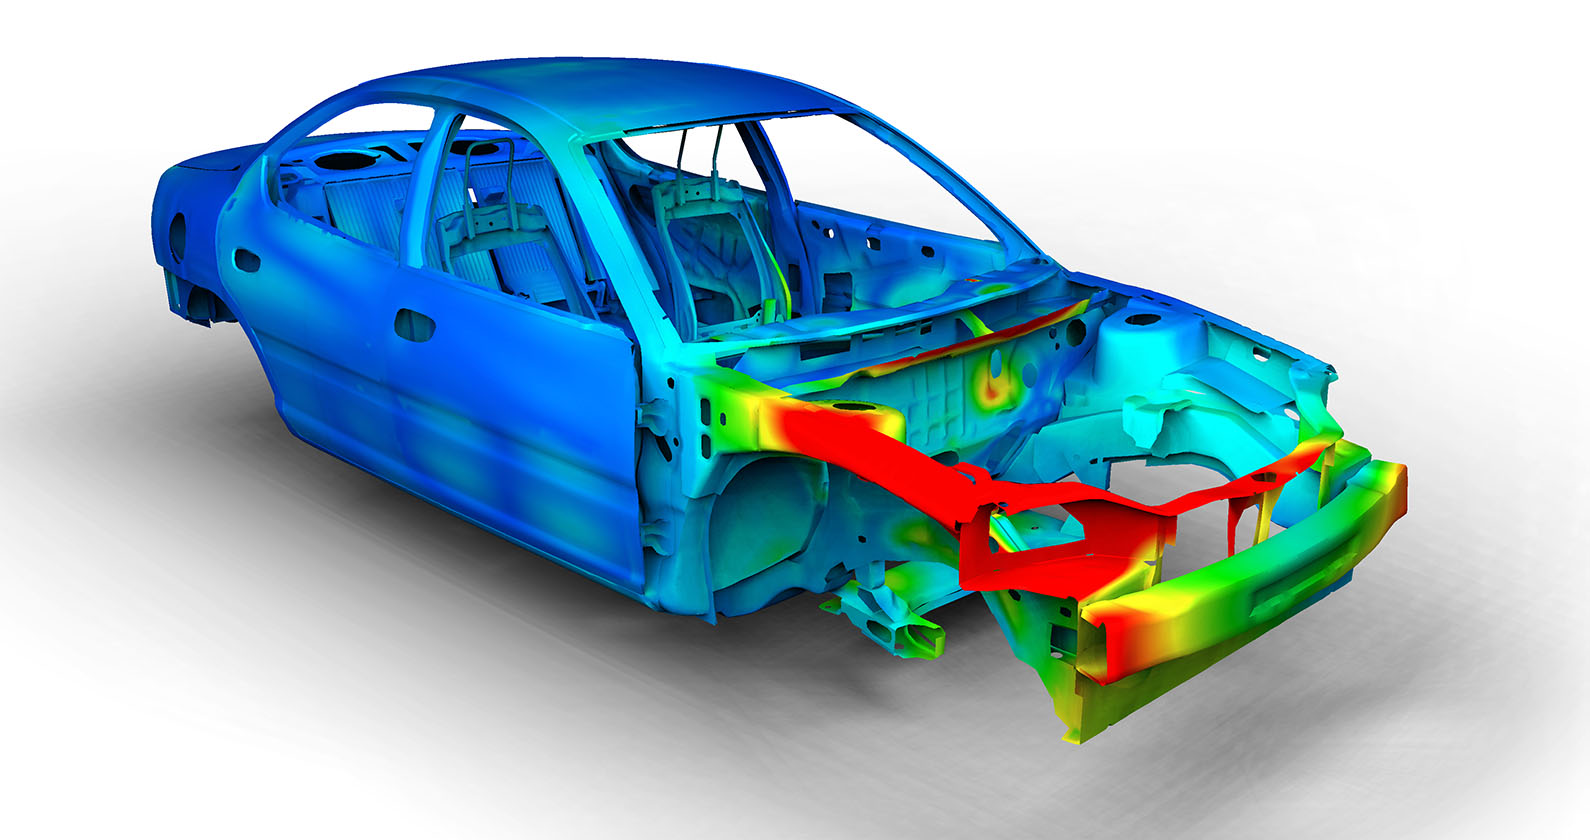 Actran for Trimmed Body - Advanced vibro-acoustic analysis combining Actran and MSC Nastran